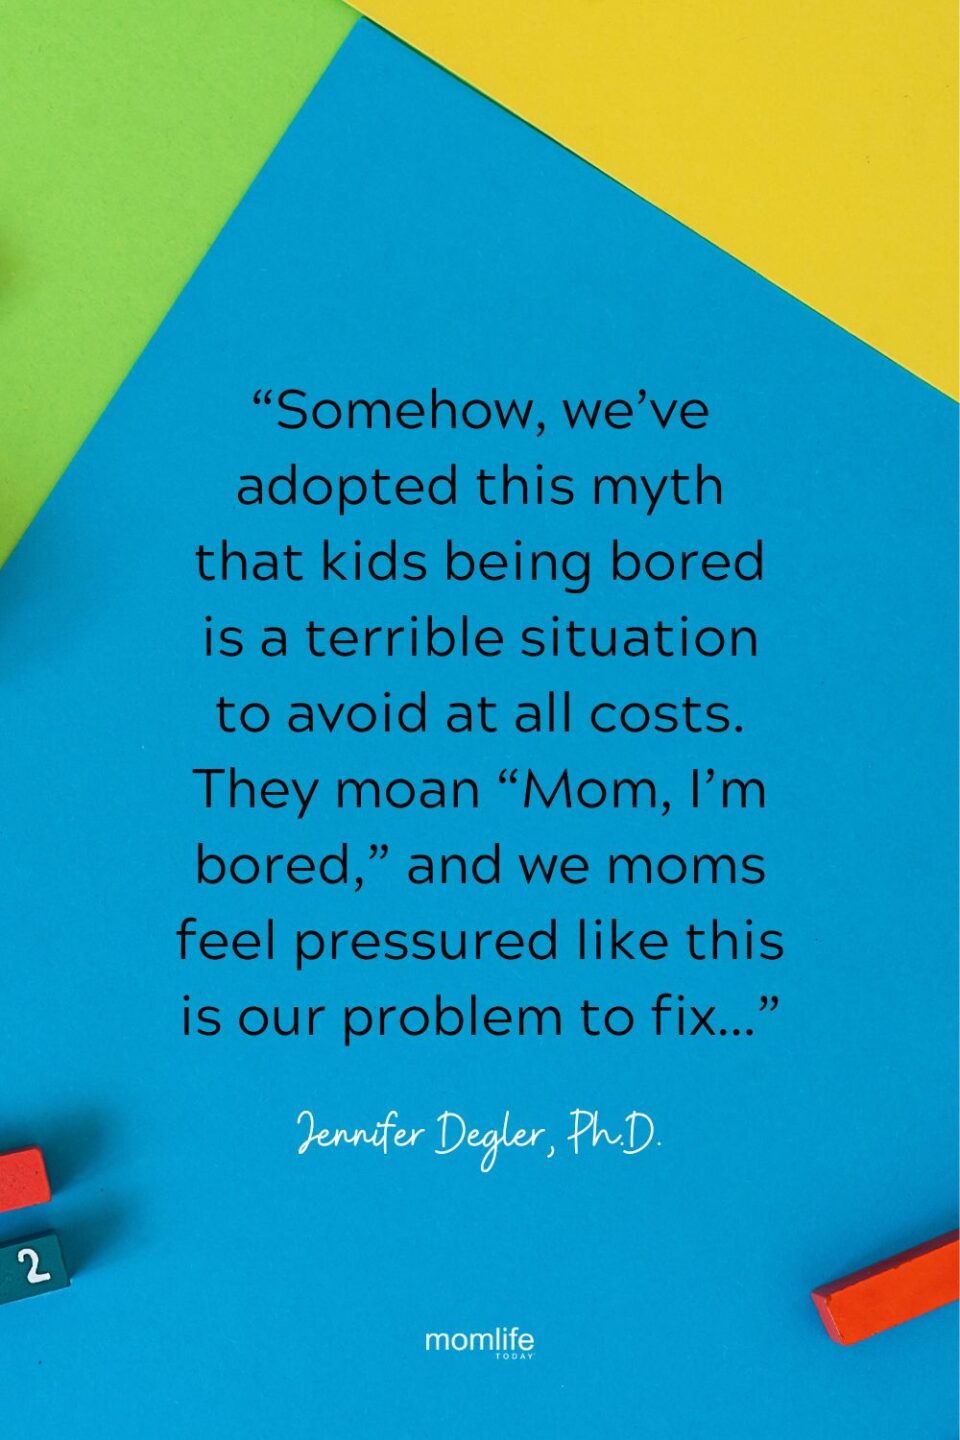 Quote about moms helping their kids with boredom